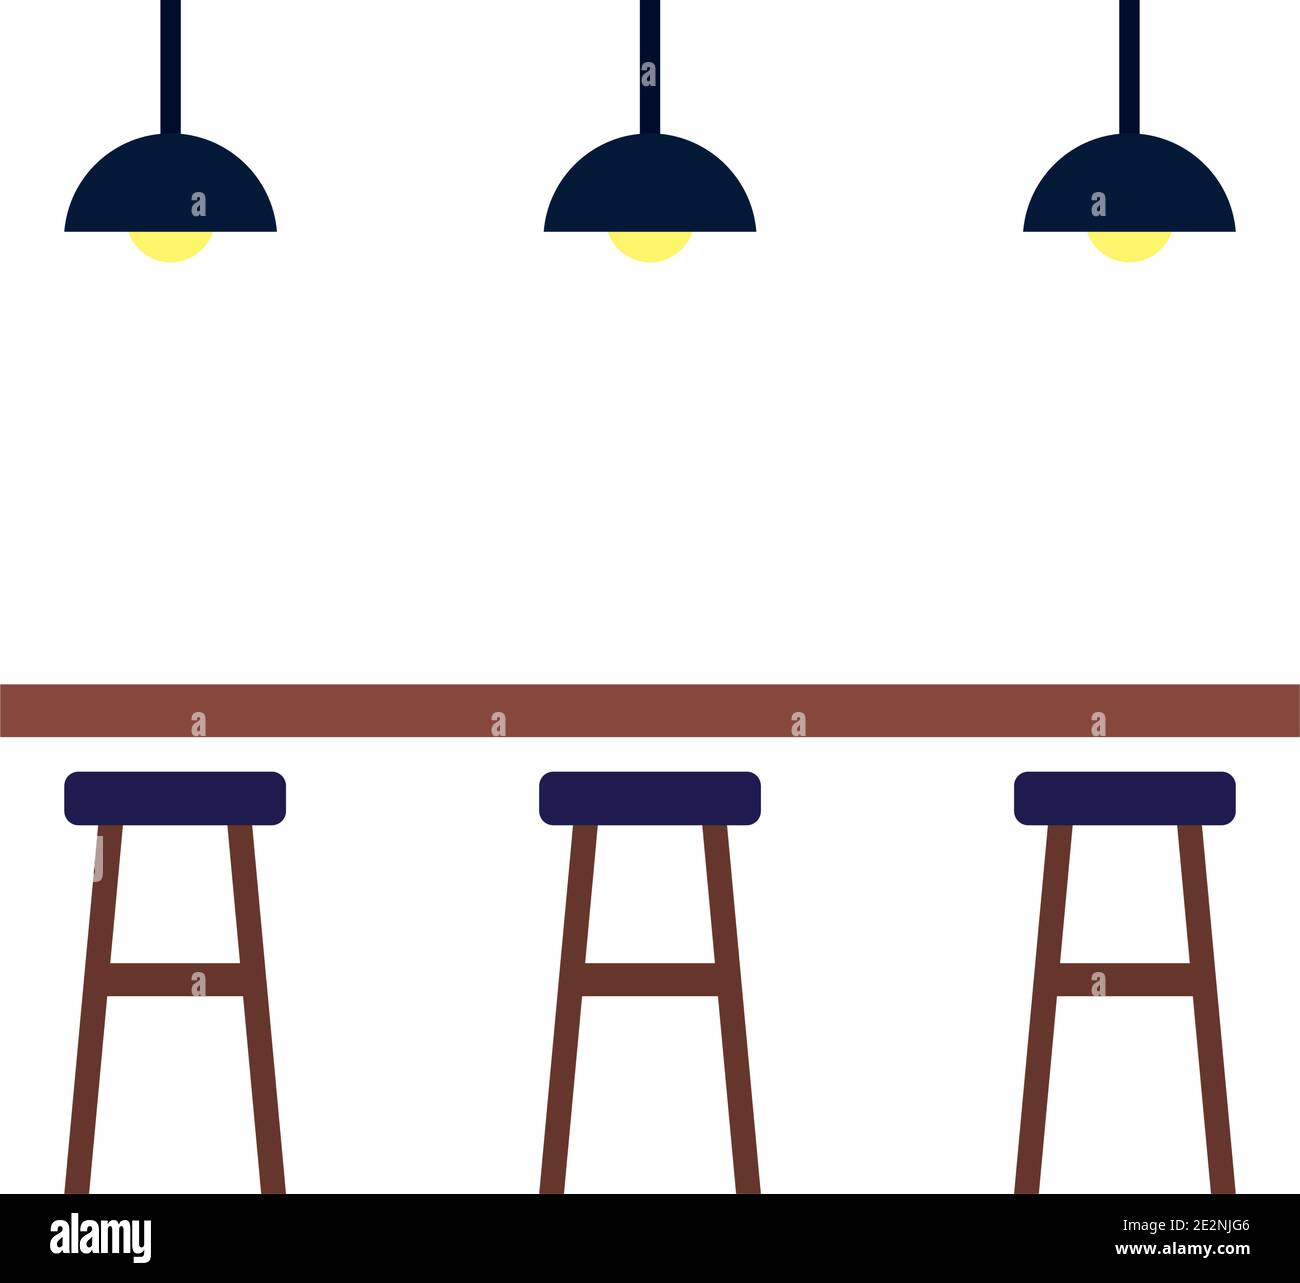 bars bar with lamps and chairs over white background, colorful design, vector illustration Stock Vector